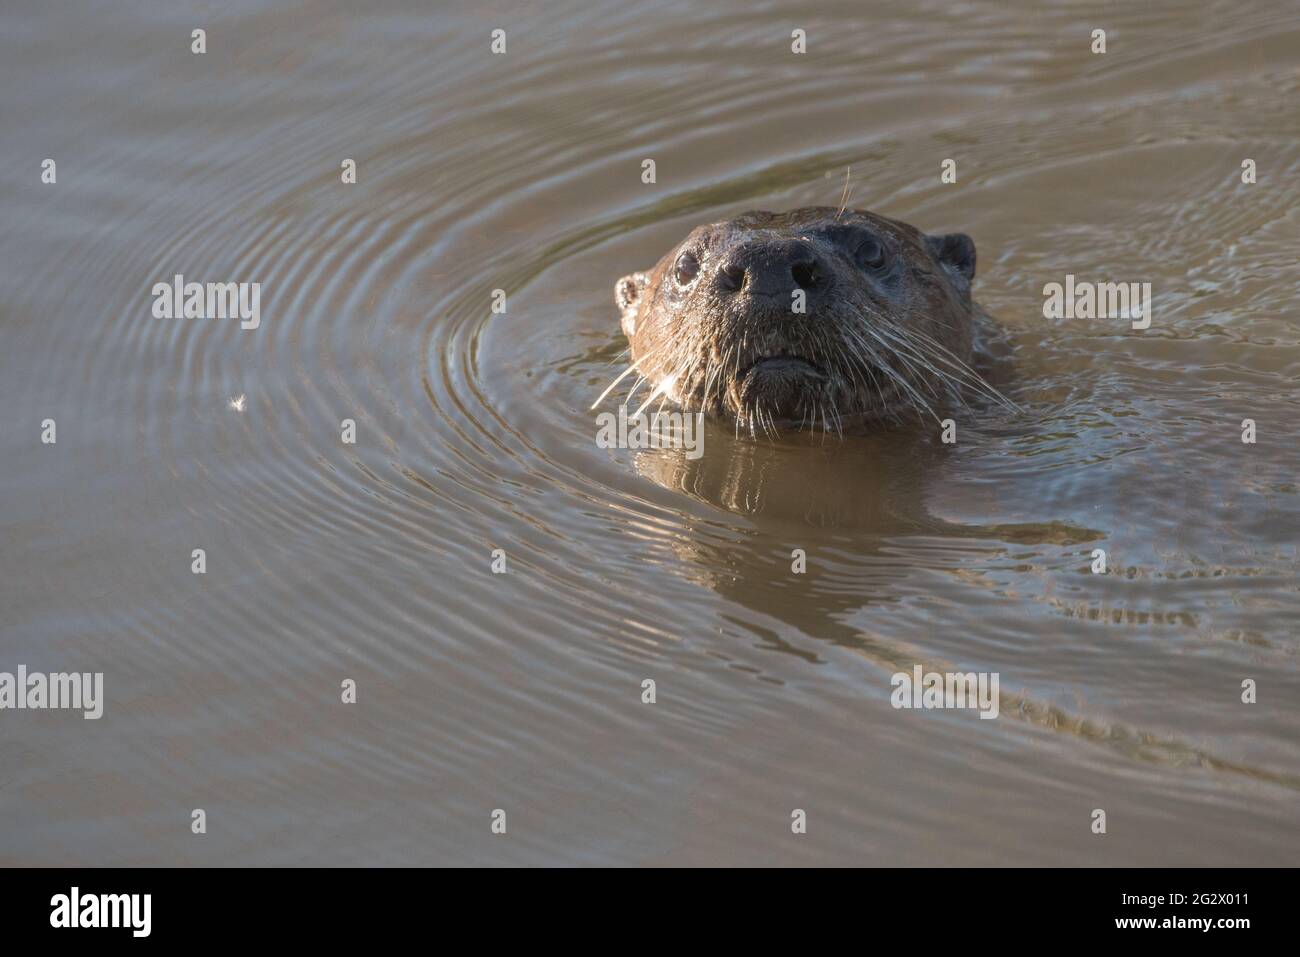 North American river otter (Lontra canadensis)) swimming in a canal in Yolo bypass wildlife area right near Sacramento, California. Stock Photo